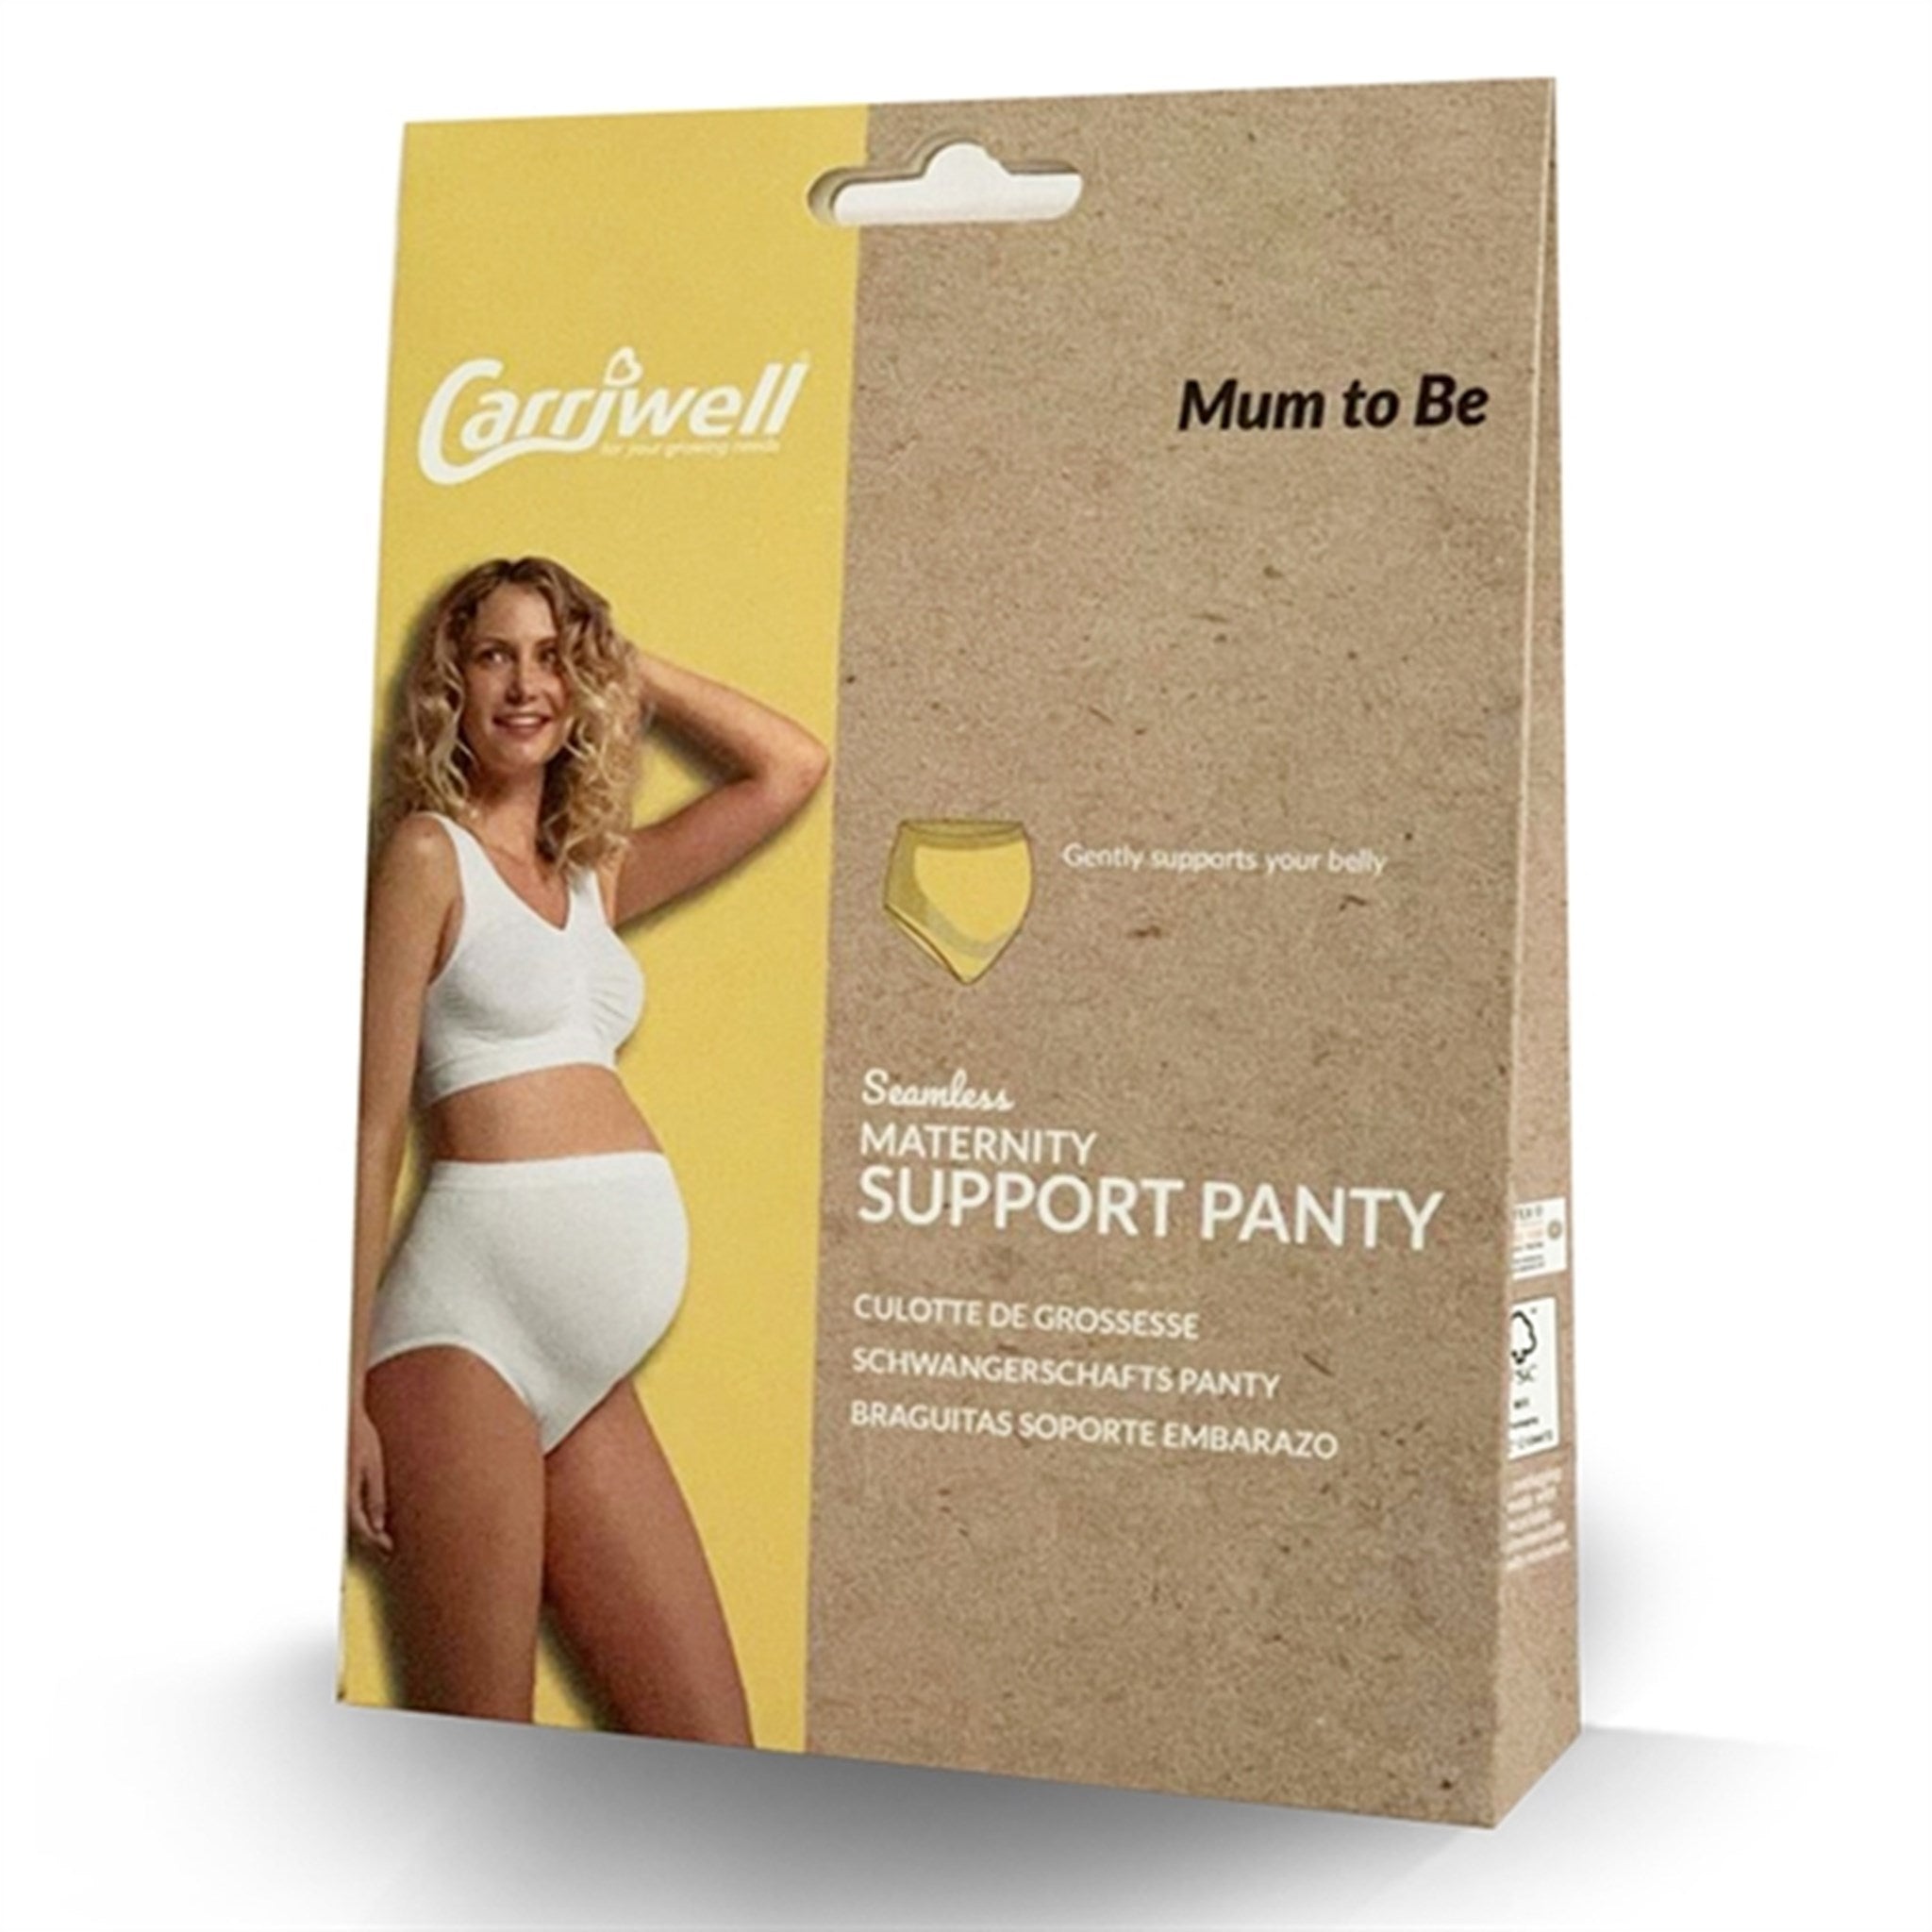 Carriwell Maternity Support Panty Black 6